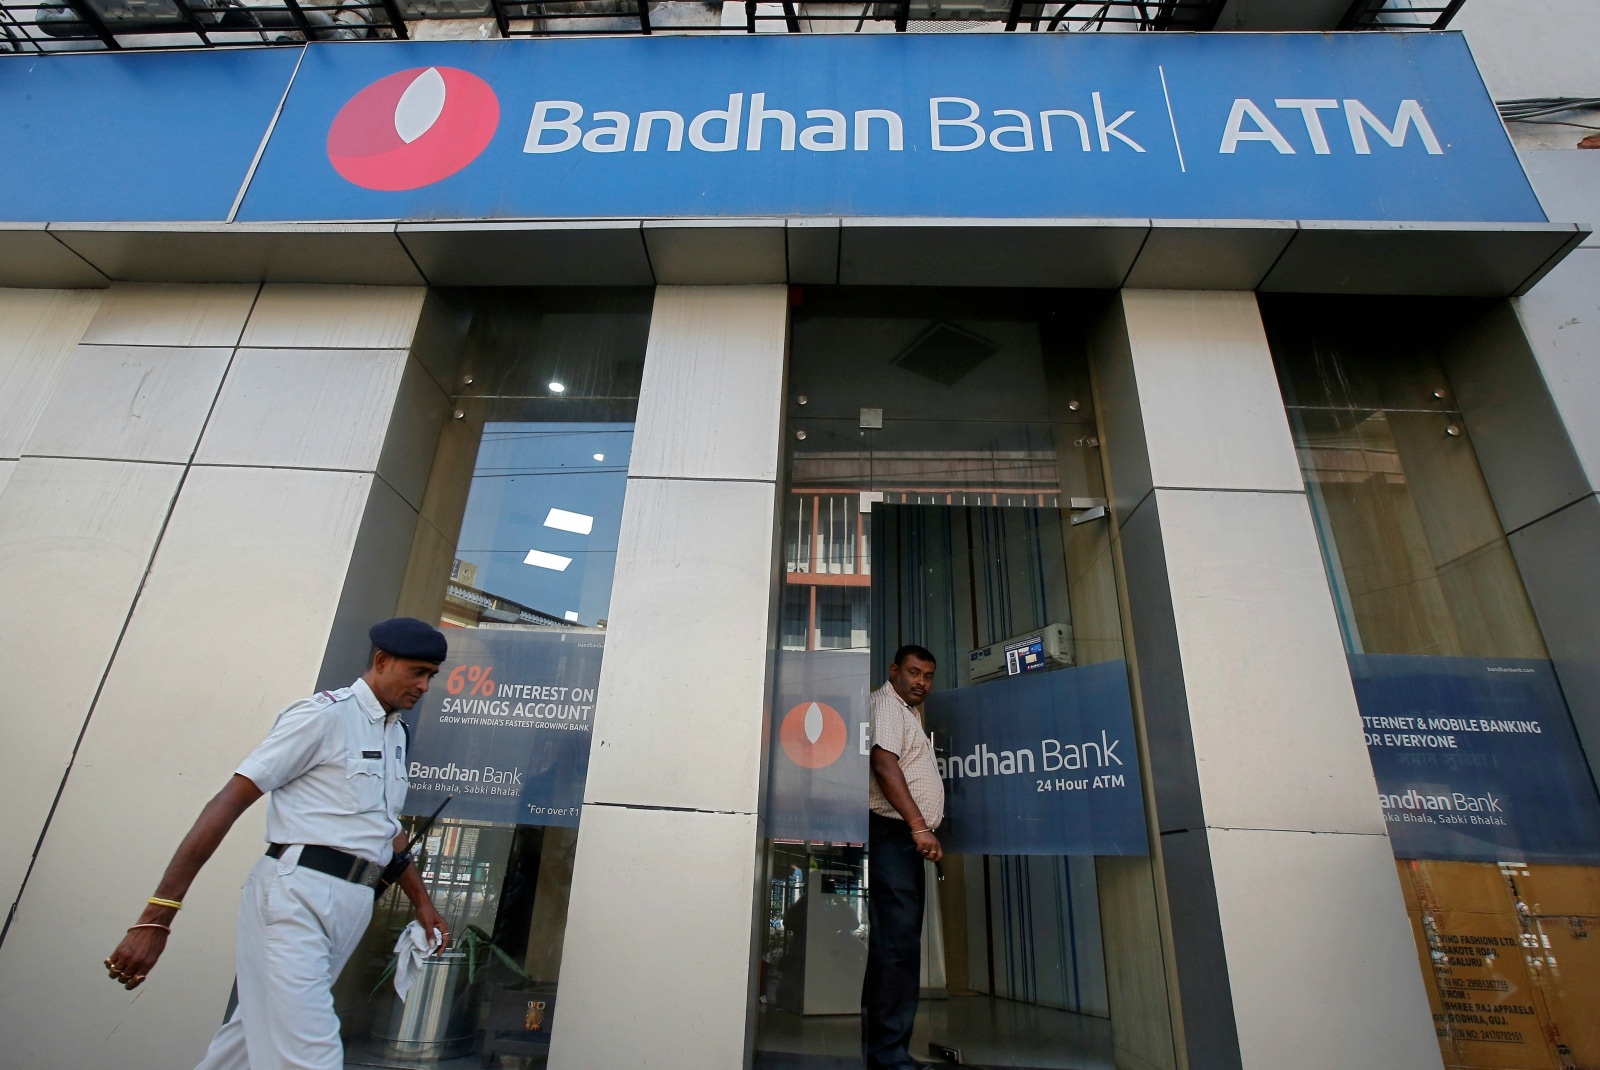  Bandhan Bank  | The bank has created a new vertical called Emerging Entrepreneurs Business (EEB) to focus on small businesses and has appointed Kumar Ashish as Executive President and Head of the department. (Image: Reuters)